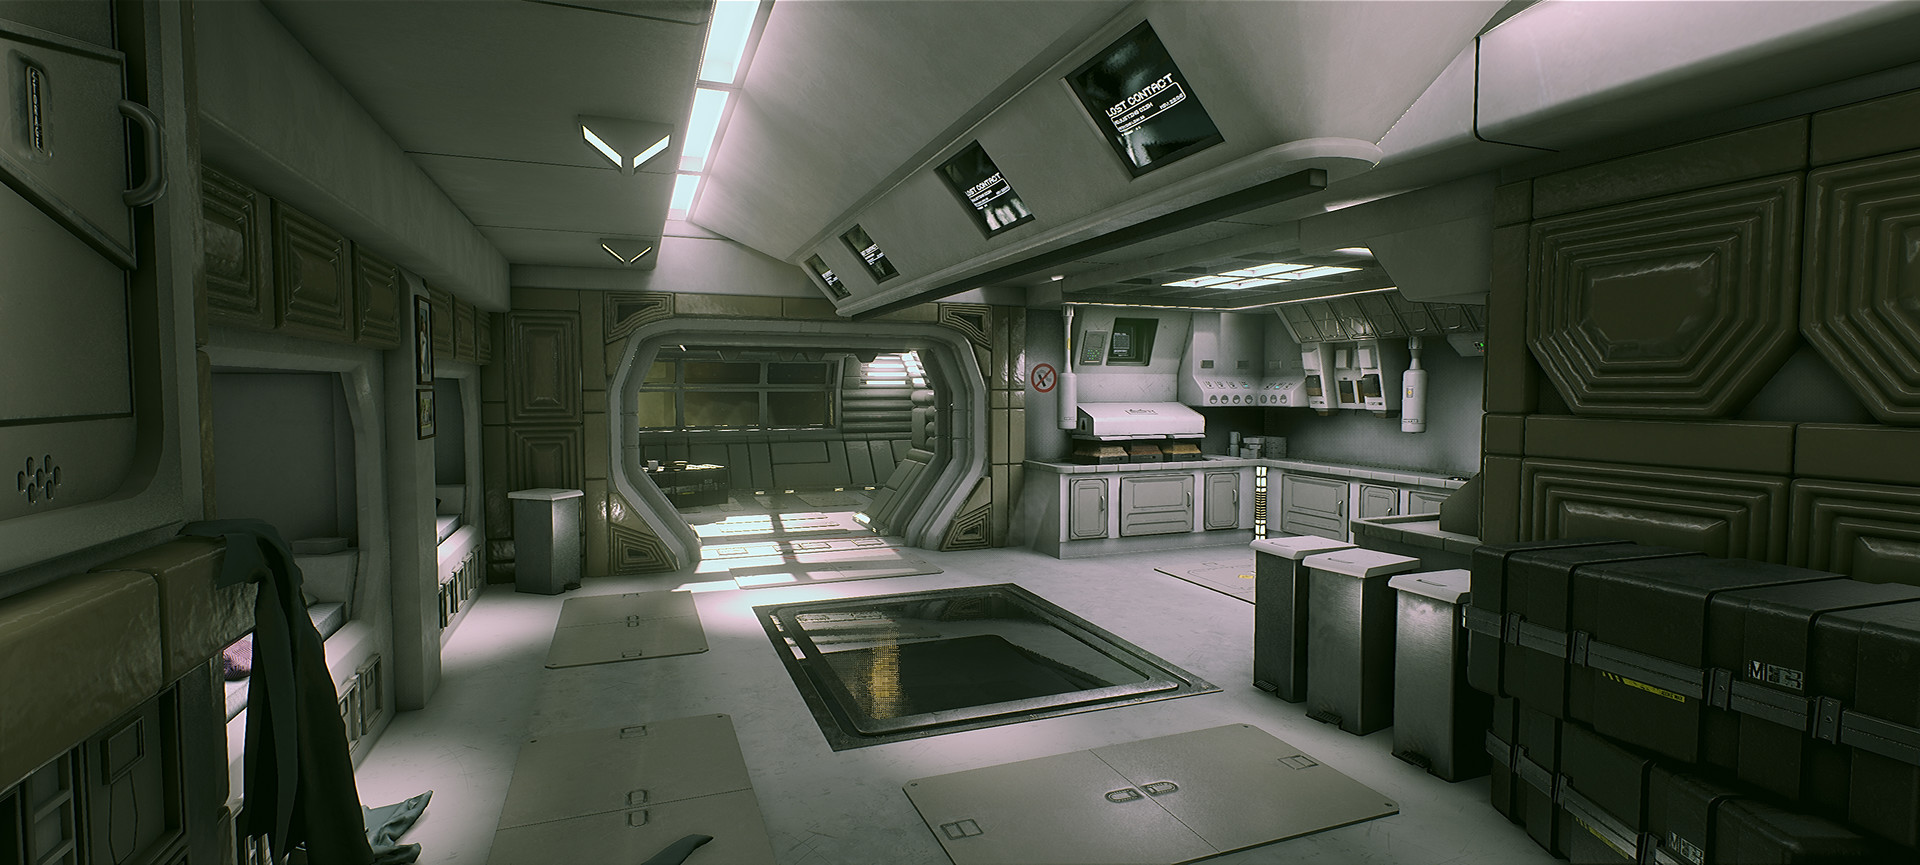 Alien: Isolation Fanart Really Nails The ‘Deserted Space Station’ Feel